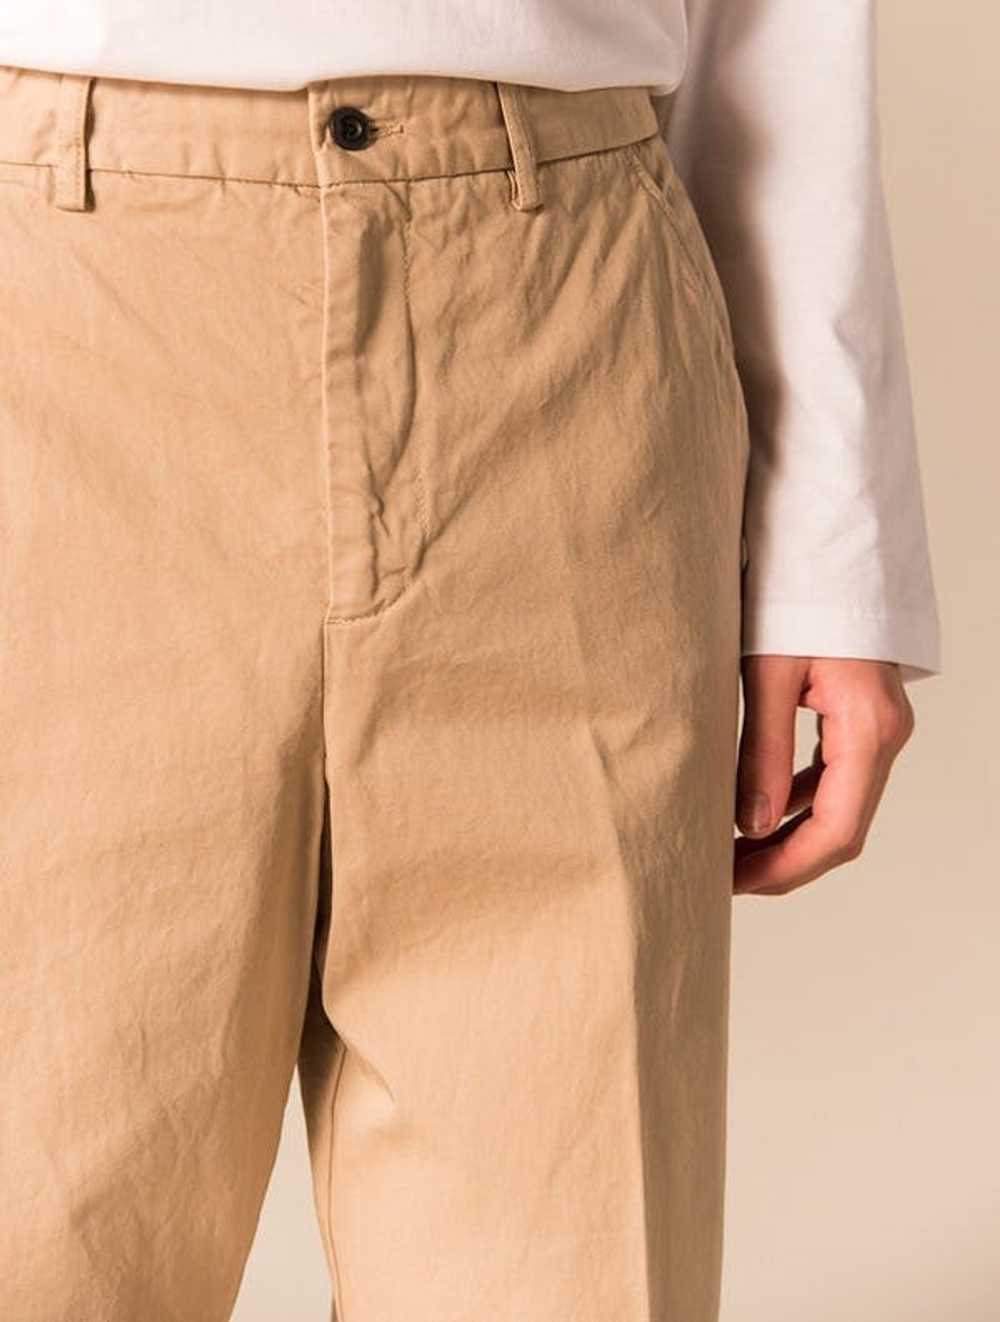 Our Legacy OUR LEGACY Chino 22 Sz 46 - image 6